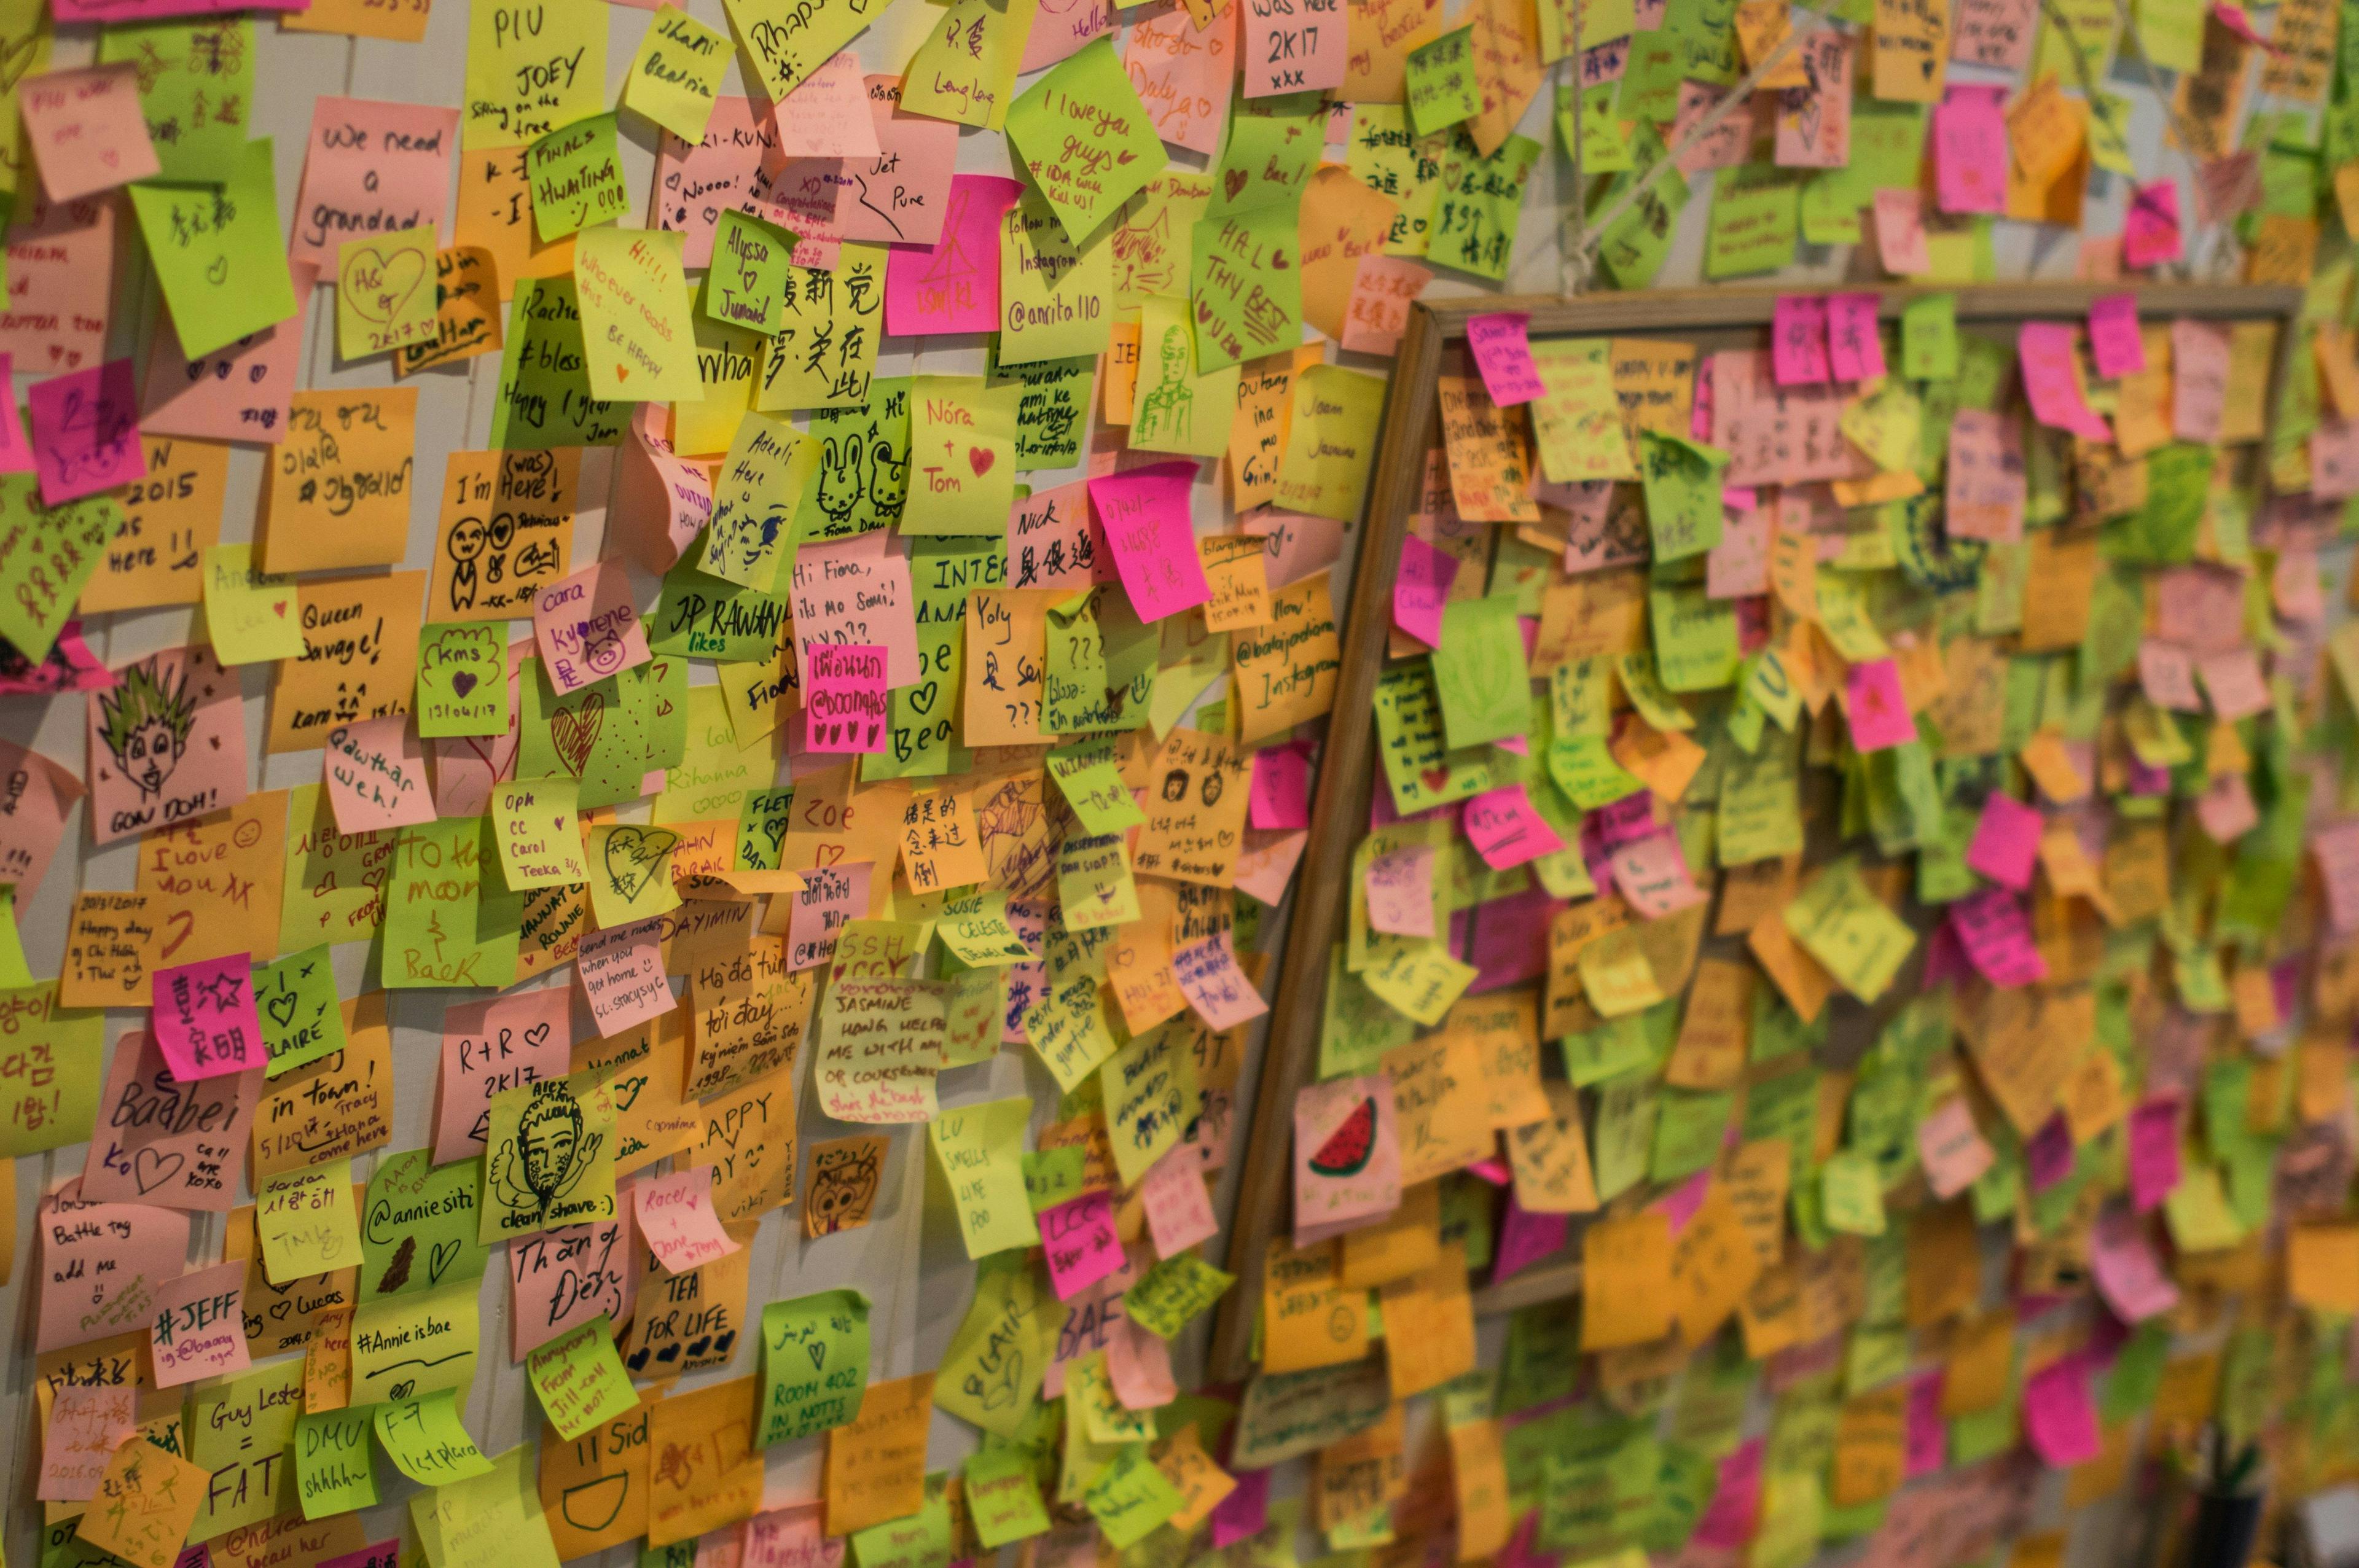 A bulletin board covered in post-it notes, symbolizing brainstorming and idea generation, in a bright, indoor setting, Photographic, using a wide-angle lens to capture the expanse of the bulletin board.